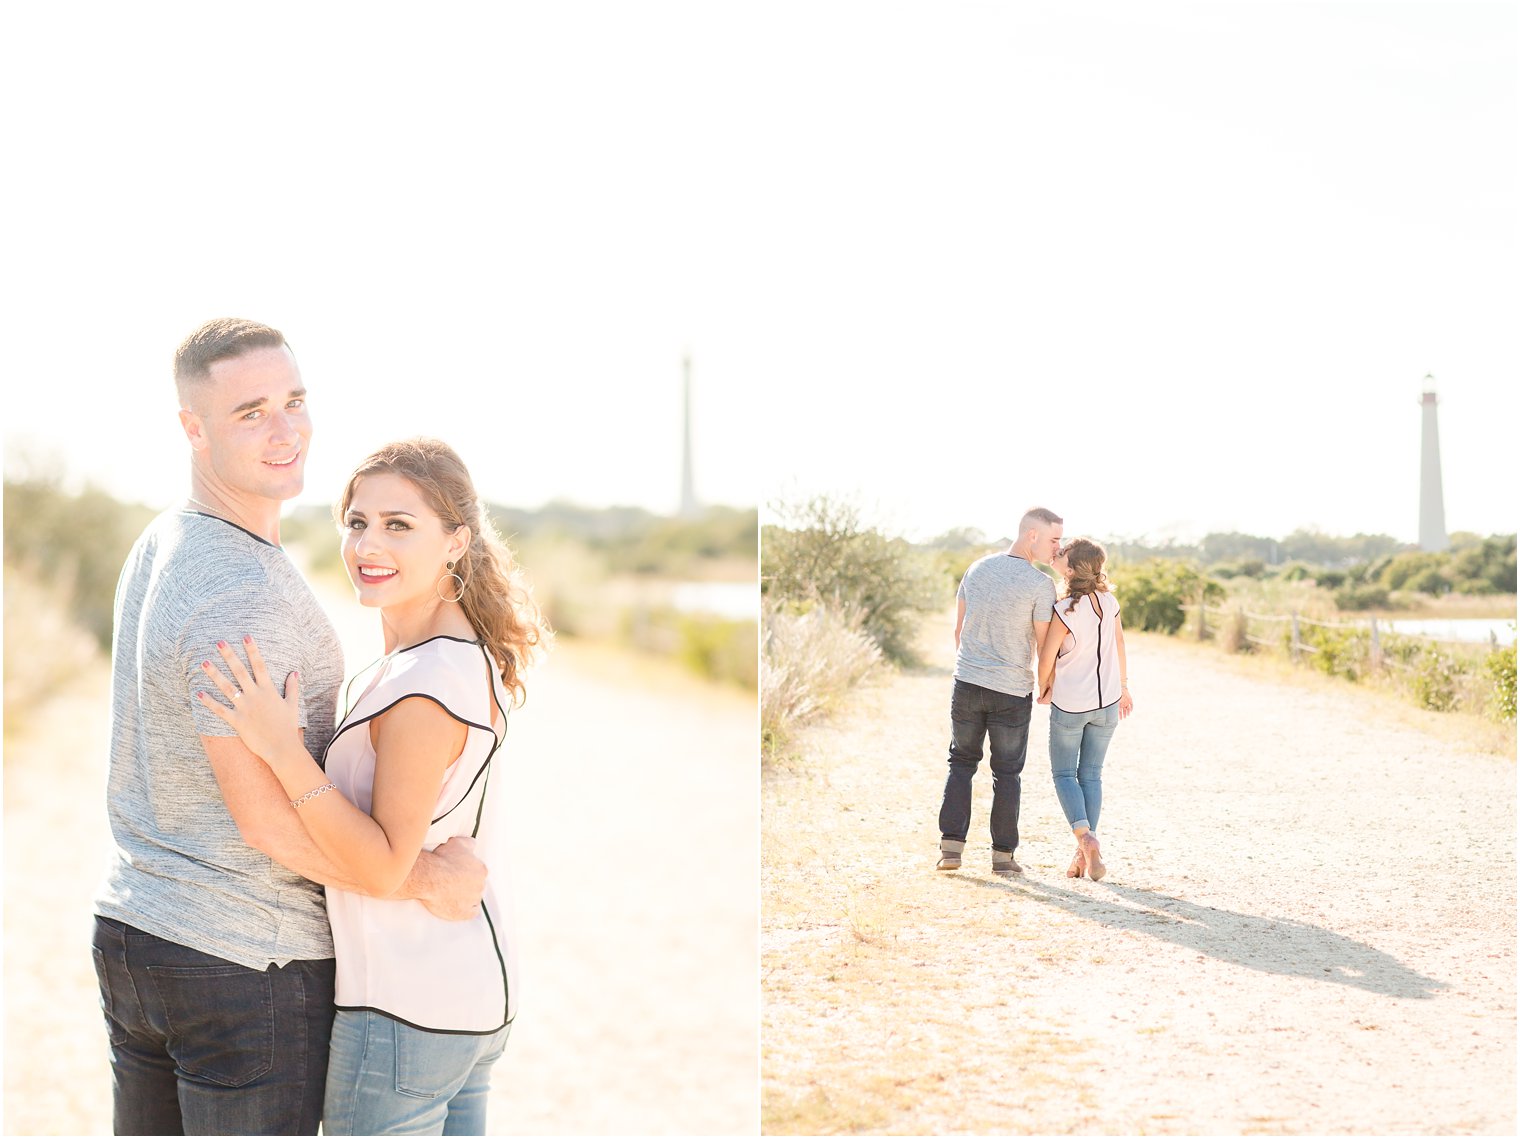 Engagement photos with Cape May lighthouse | Photos by Idalia Photography